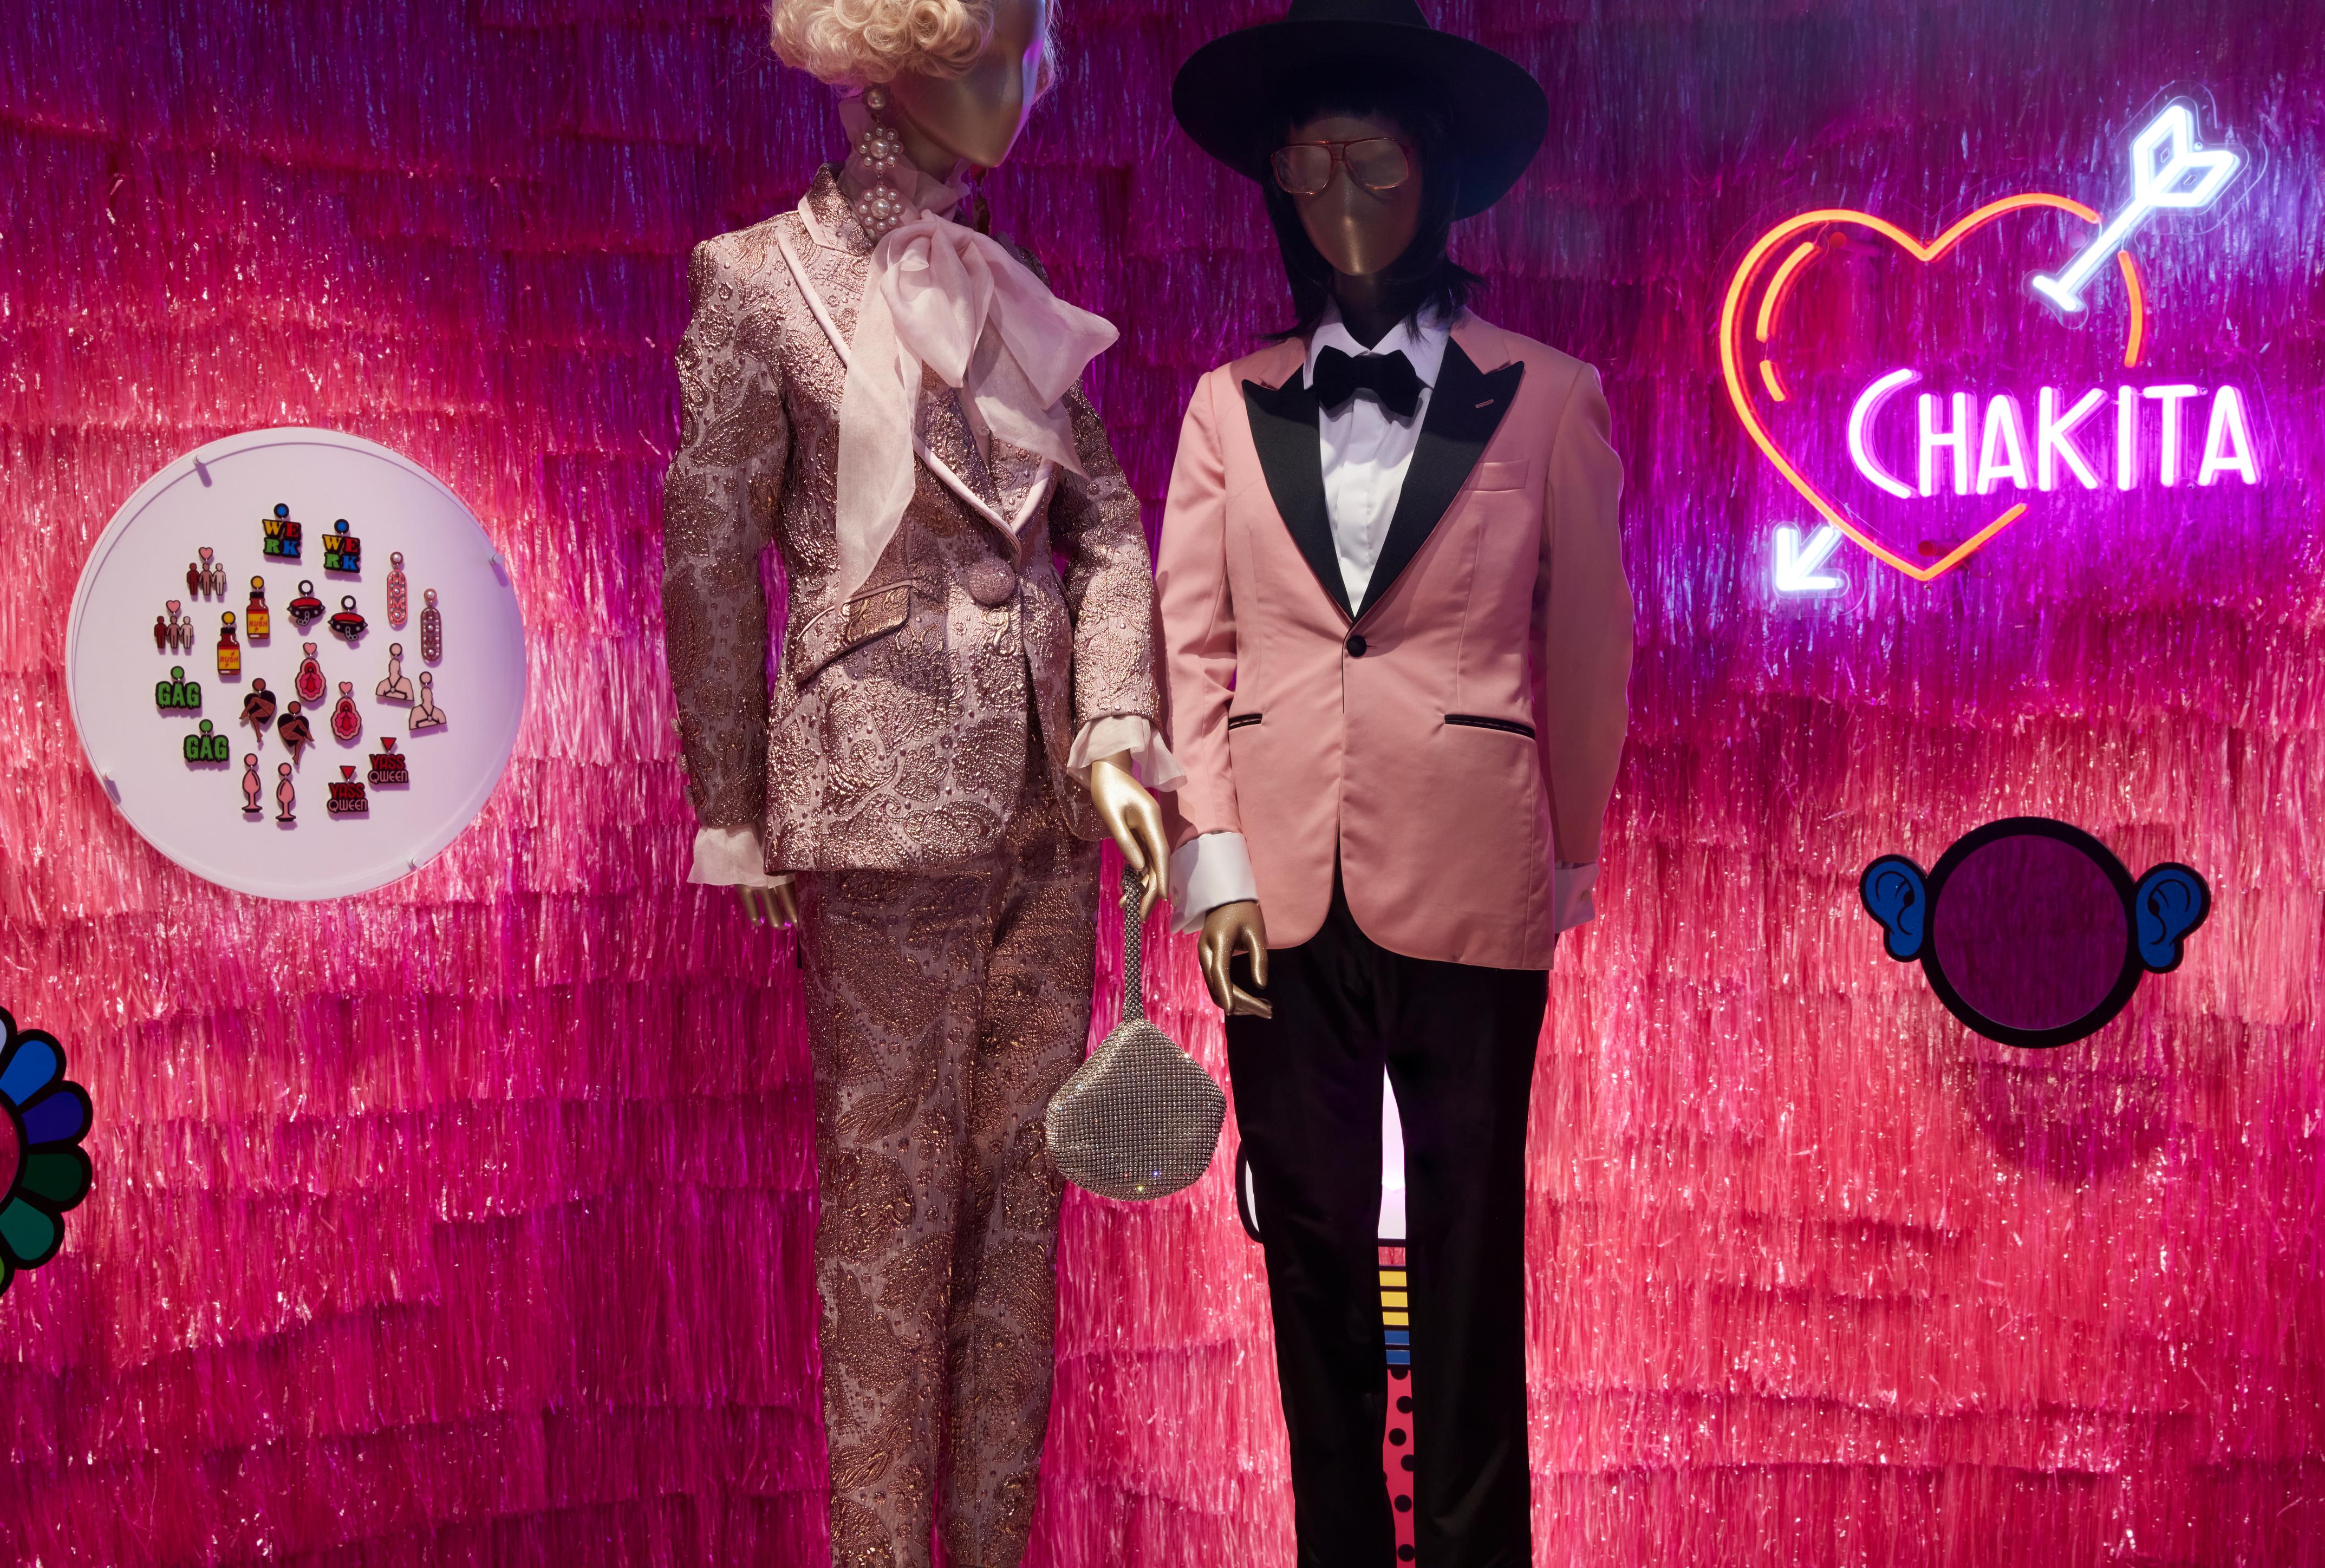 Two mannequins wearing pink suits and accessories standing in front of a wall lined with pink glitter streamers. A neon light love heart with an arrow through it and ‘CHAKITA’ hangs on the wall.